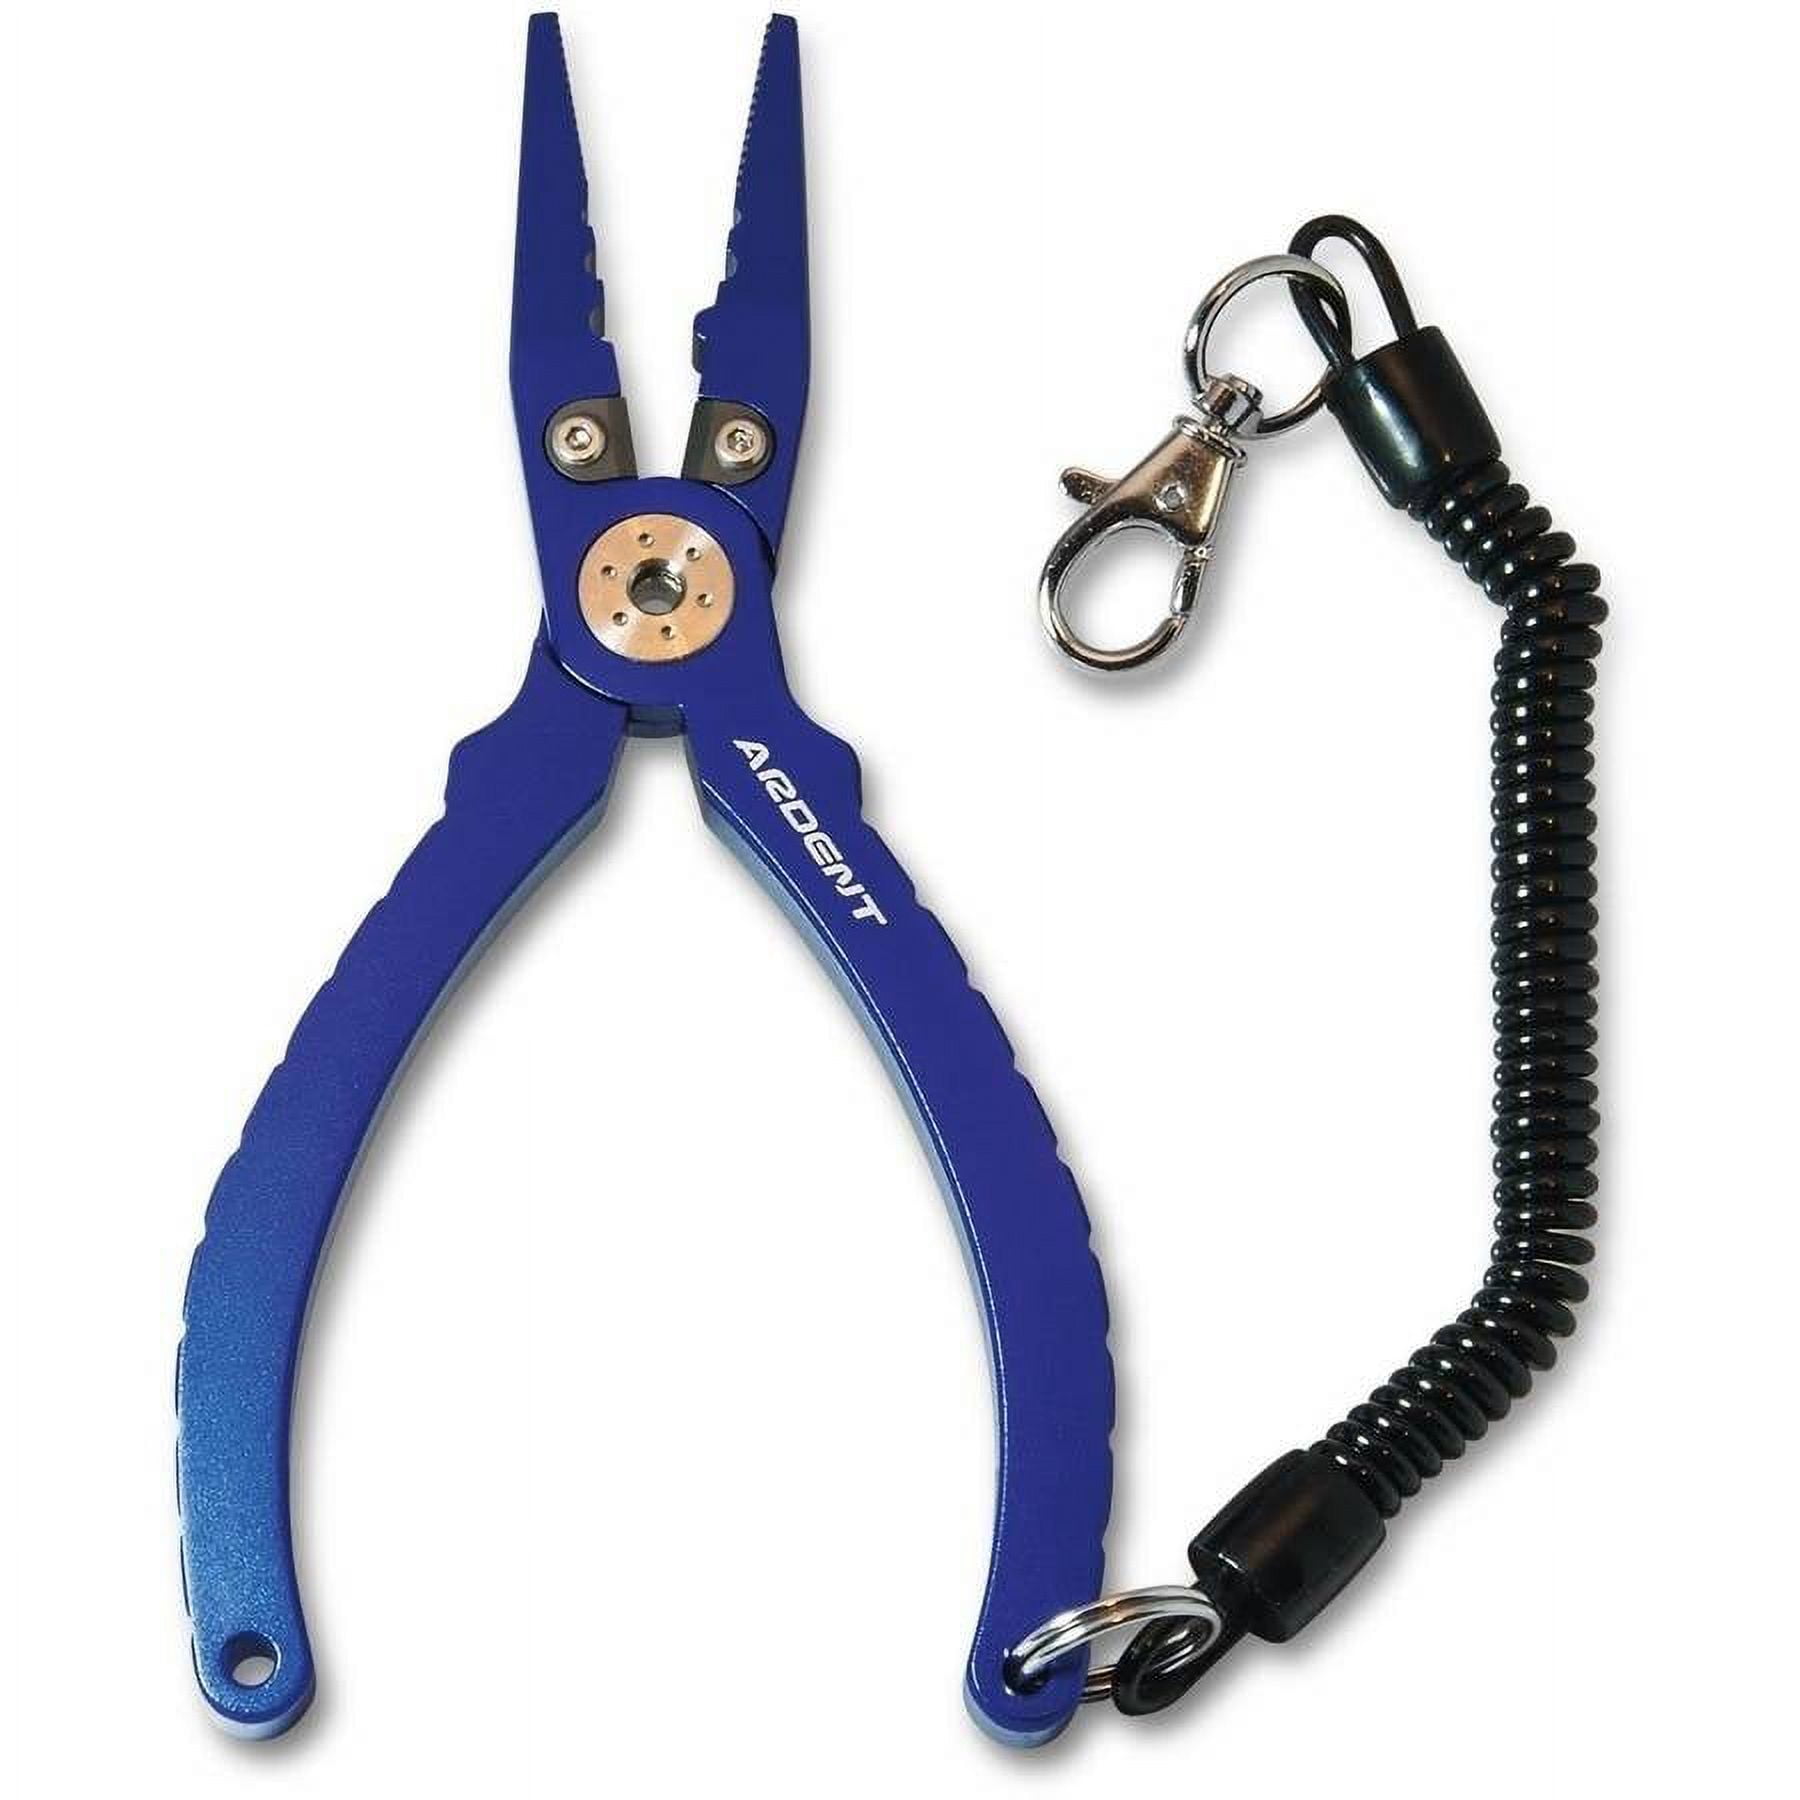 Rabbith Fishing Pliers Gripper Metal Fish Control Clamp Claw Tong Grip Tackle Tool Control Forceps for Catch Fish Fishing Accessories